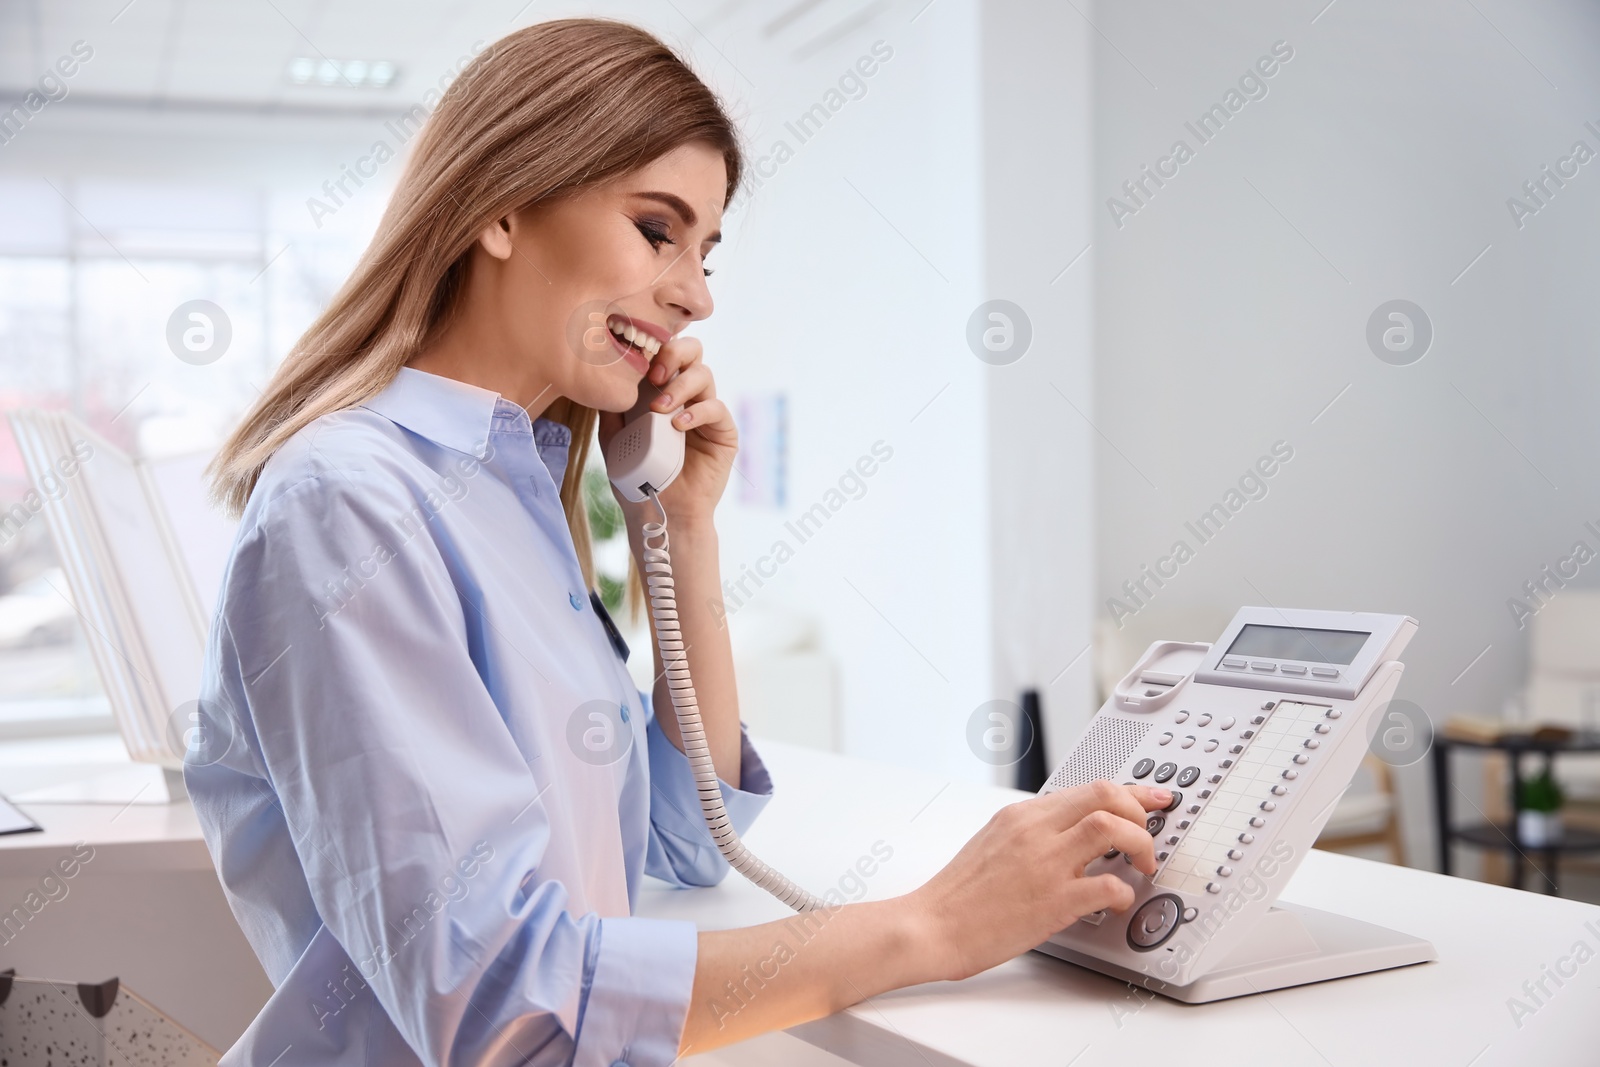 Photo of Female receptionist talking on phone at hotel check-in counter